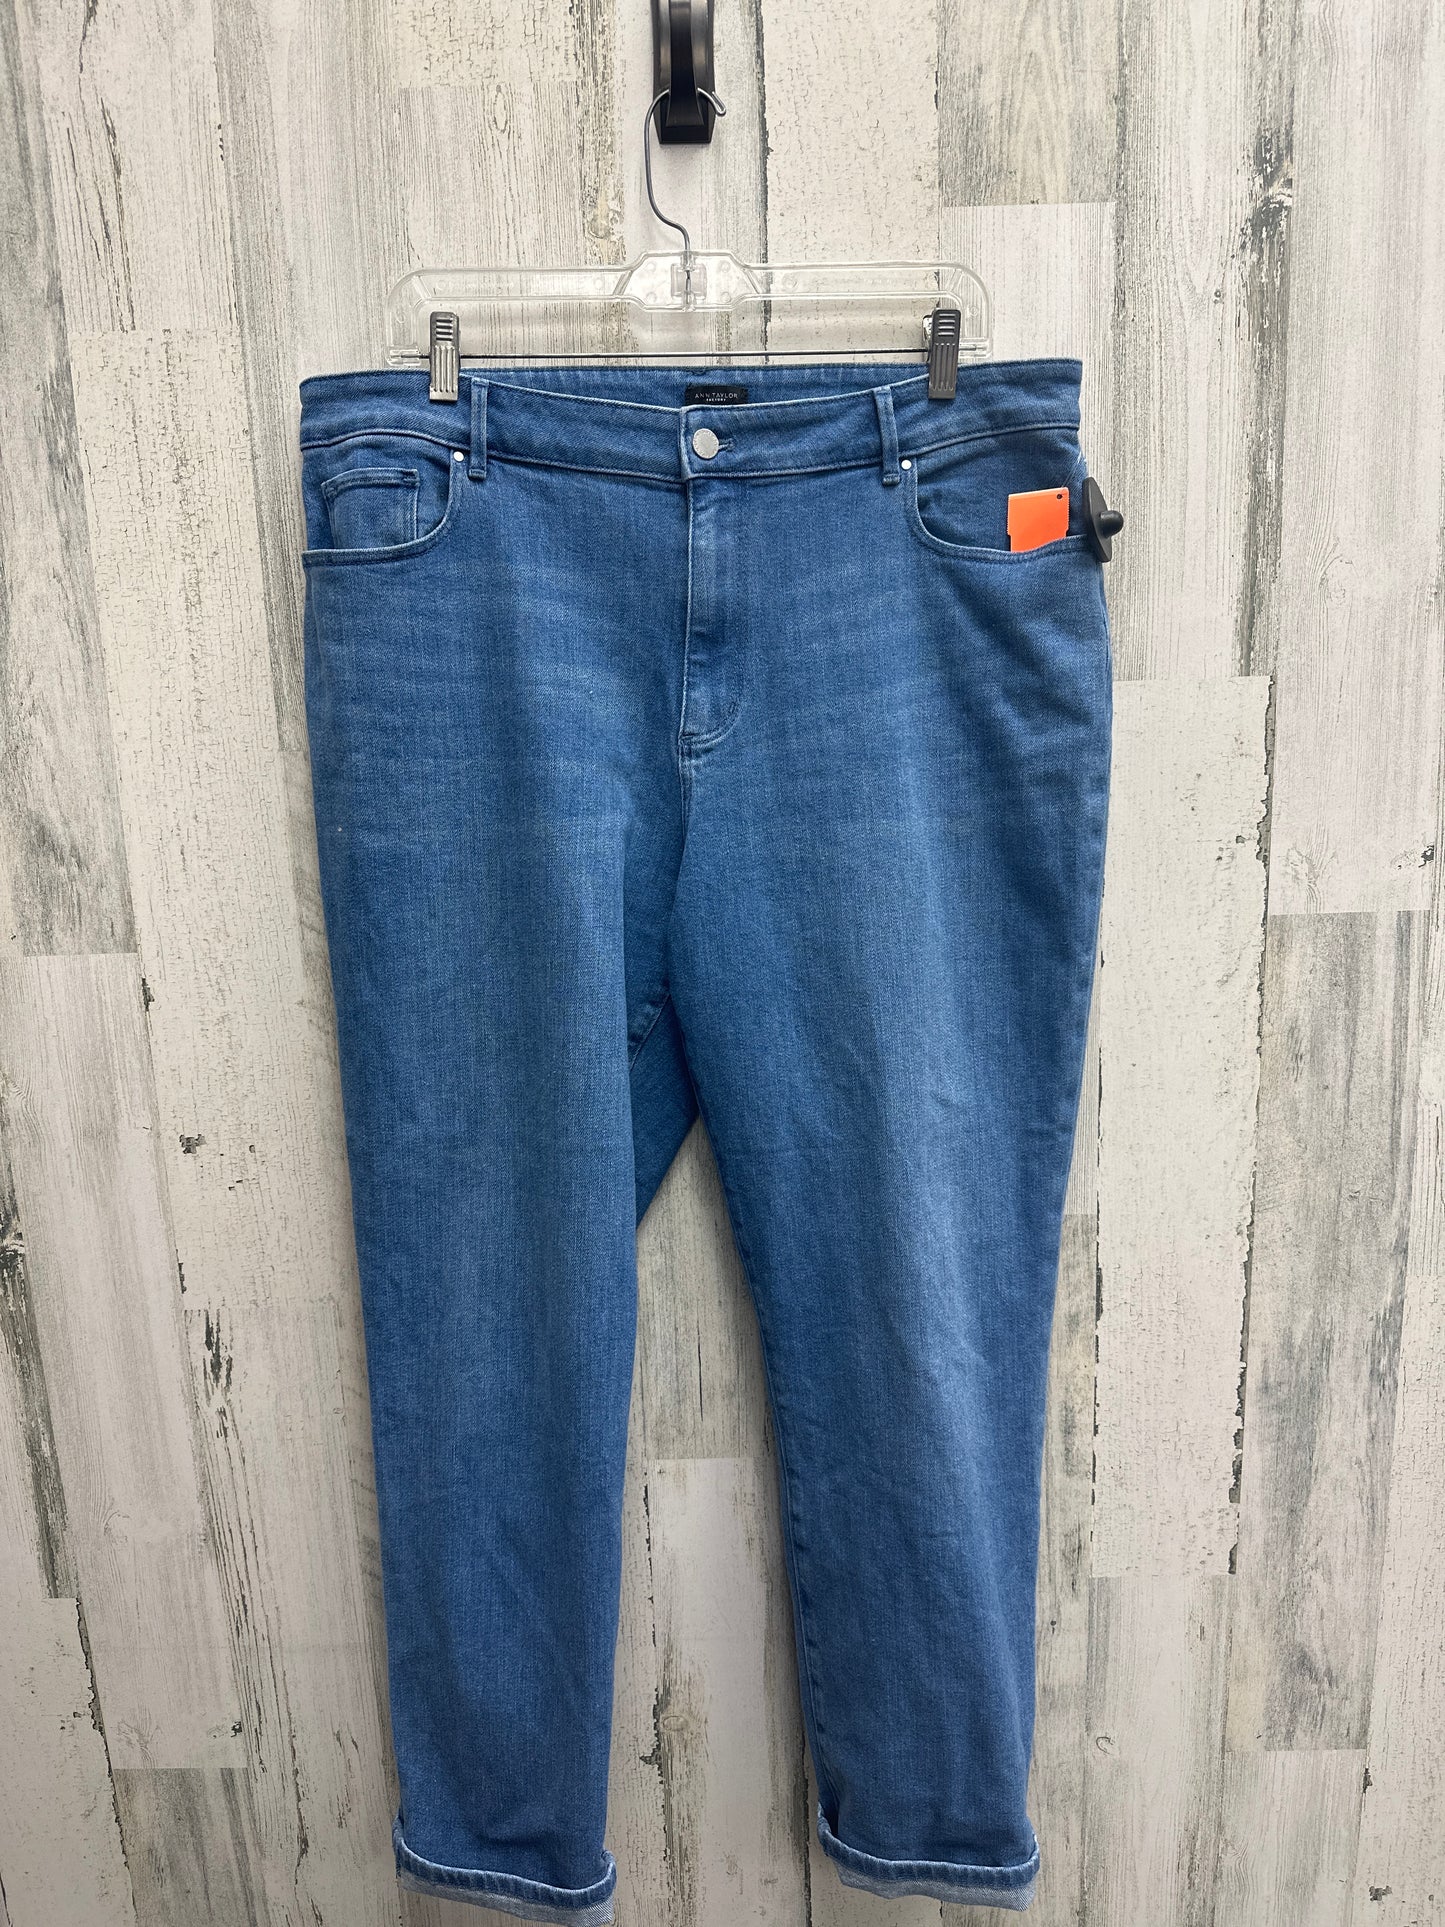 Jeans Skinny By Ann Taylor  Size: 14